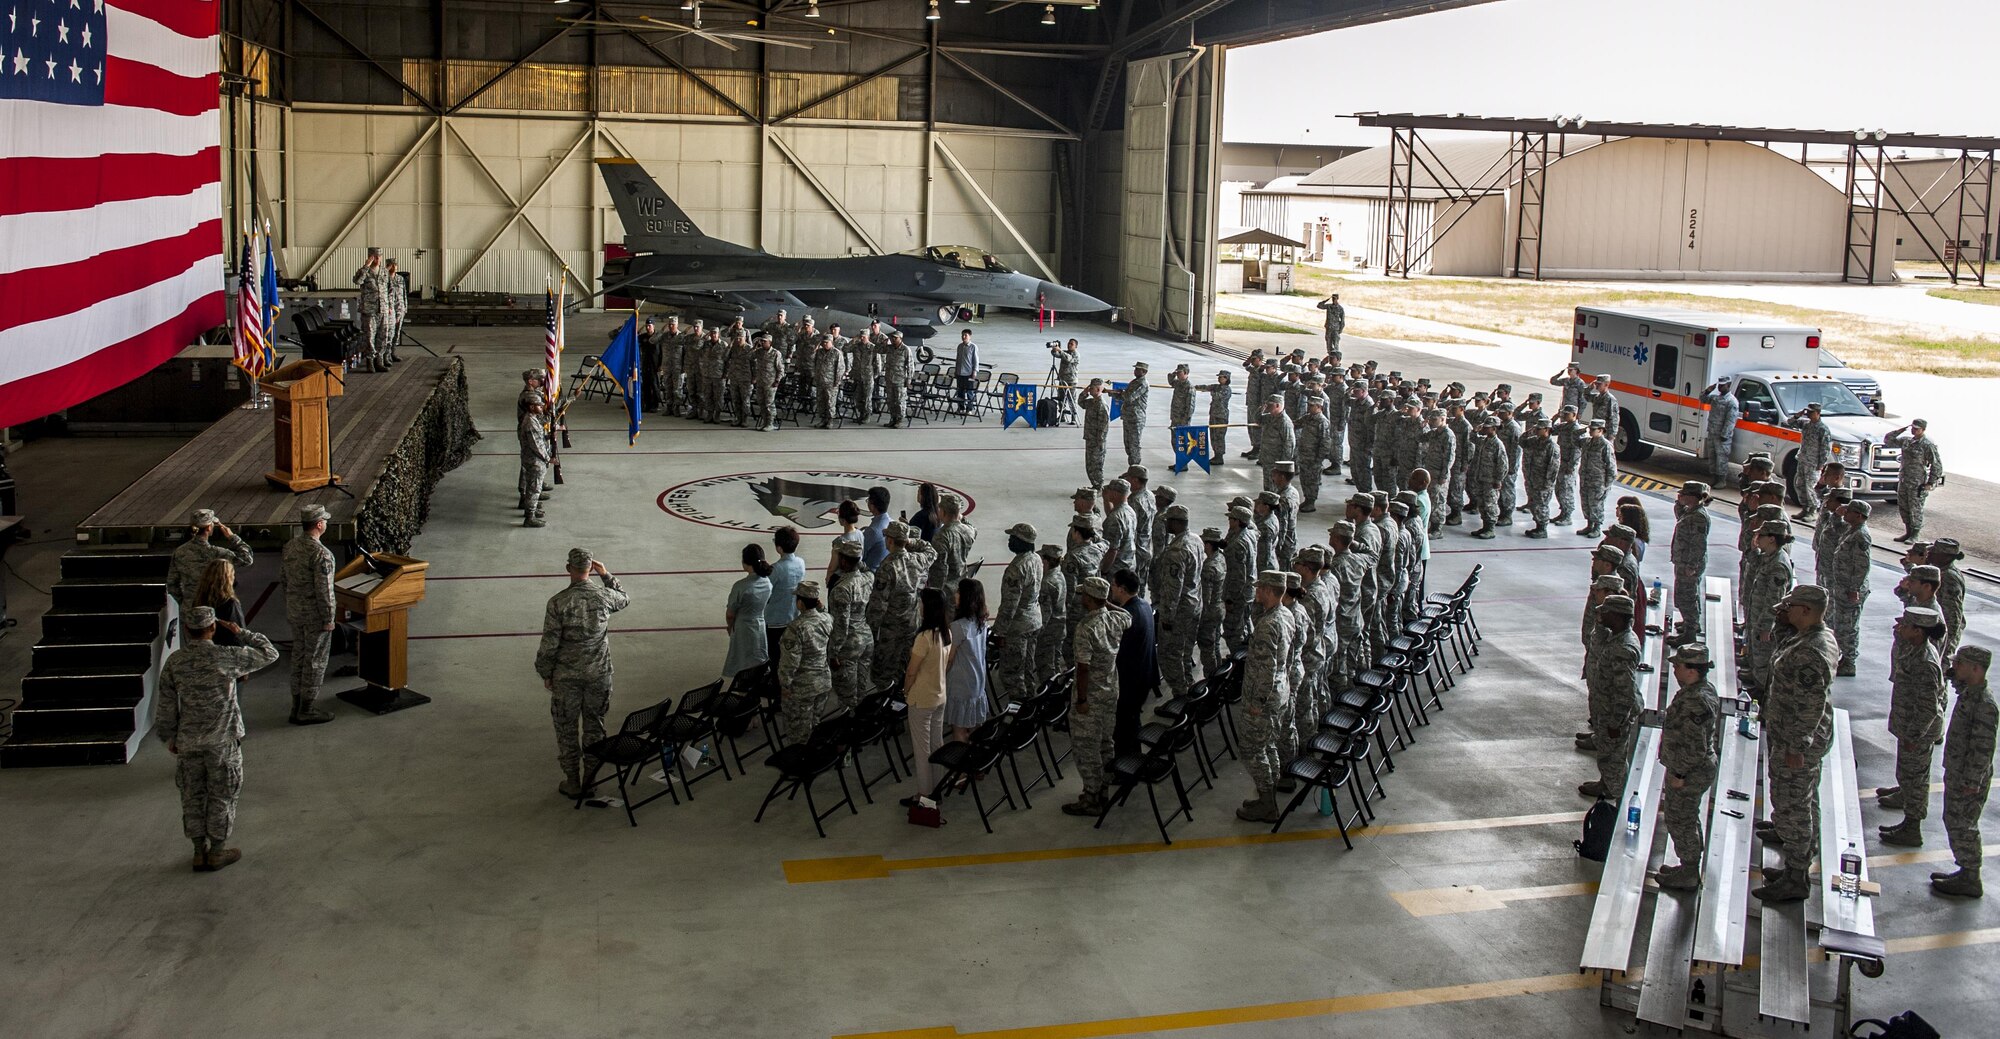 U.S. Air Force Col. David Shoemaker, 8th Fighter Wing commander, Col. Lisa A. Davison, 8th Medical Group outgoing commander, and Col. Joann V. Palmer, 8th MDG incoming commander, salute during a change of command ceremony at Kunsan Air Base, Republic of Korea, June 23, 2017. During the ceremony, Davison relinquished command of the 8th MDG to Palmer. (U.S. Air Force photo by Senior Airman Colville McFee/Released)